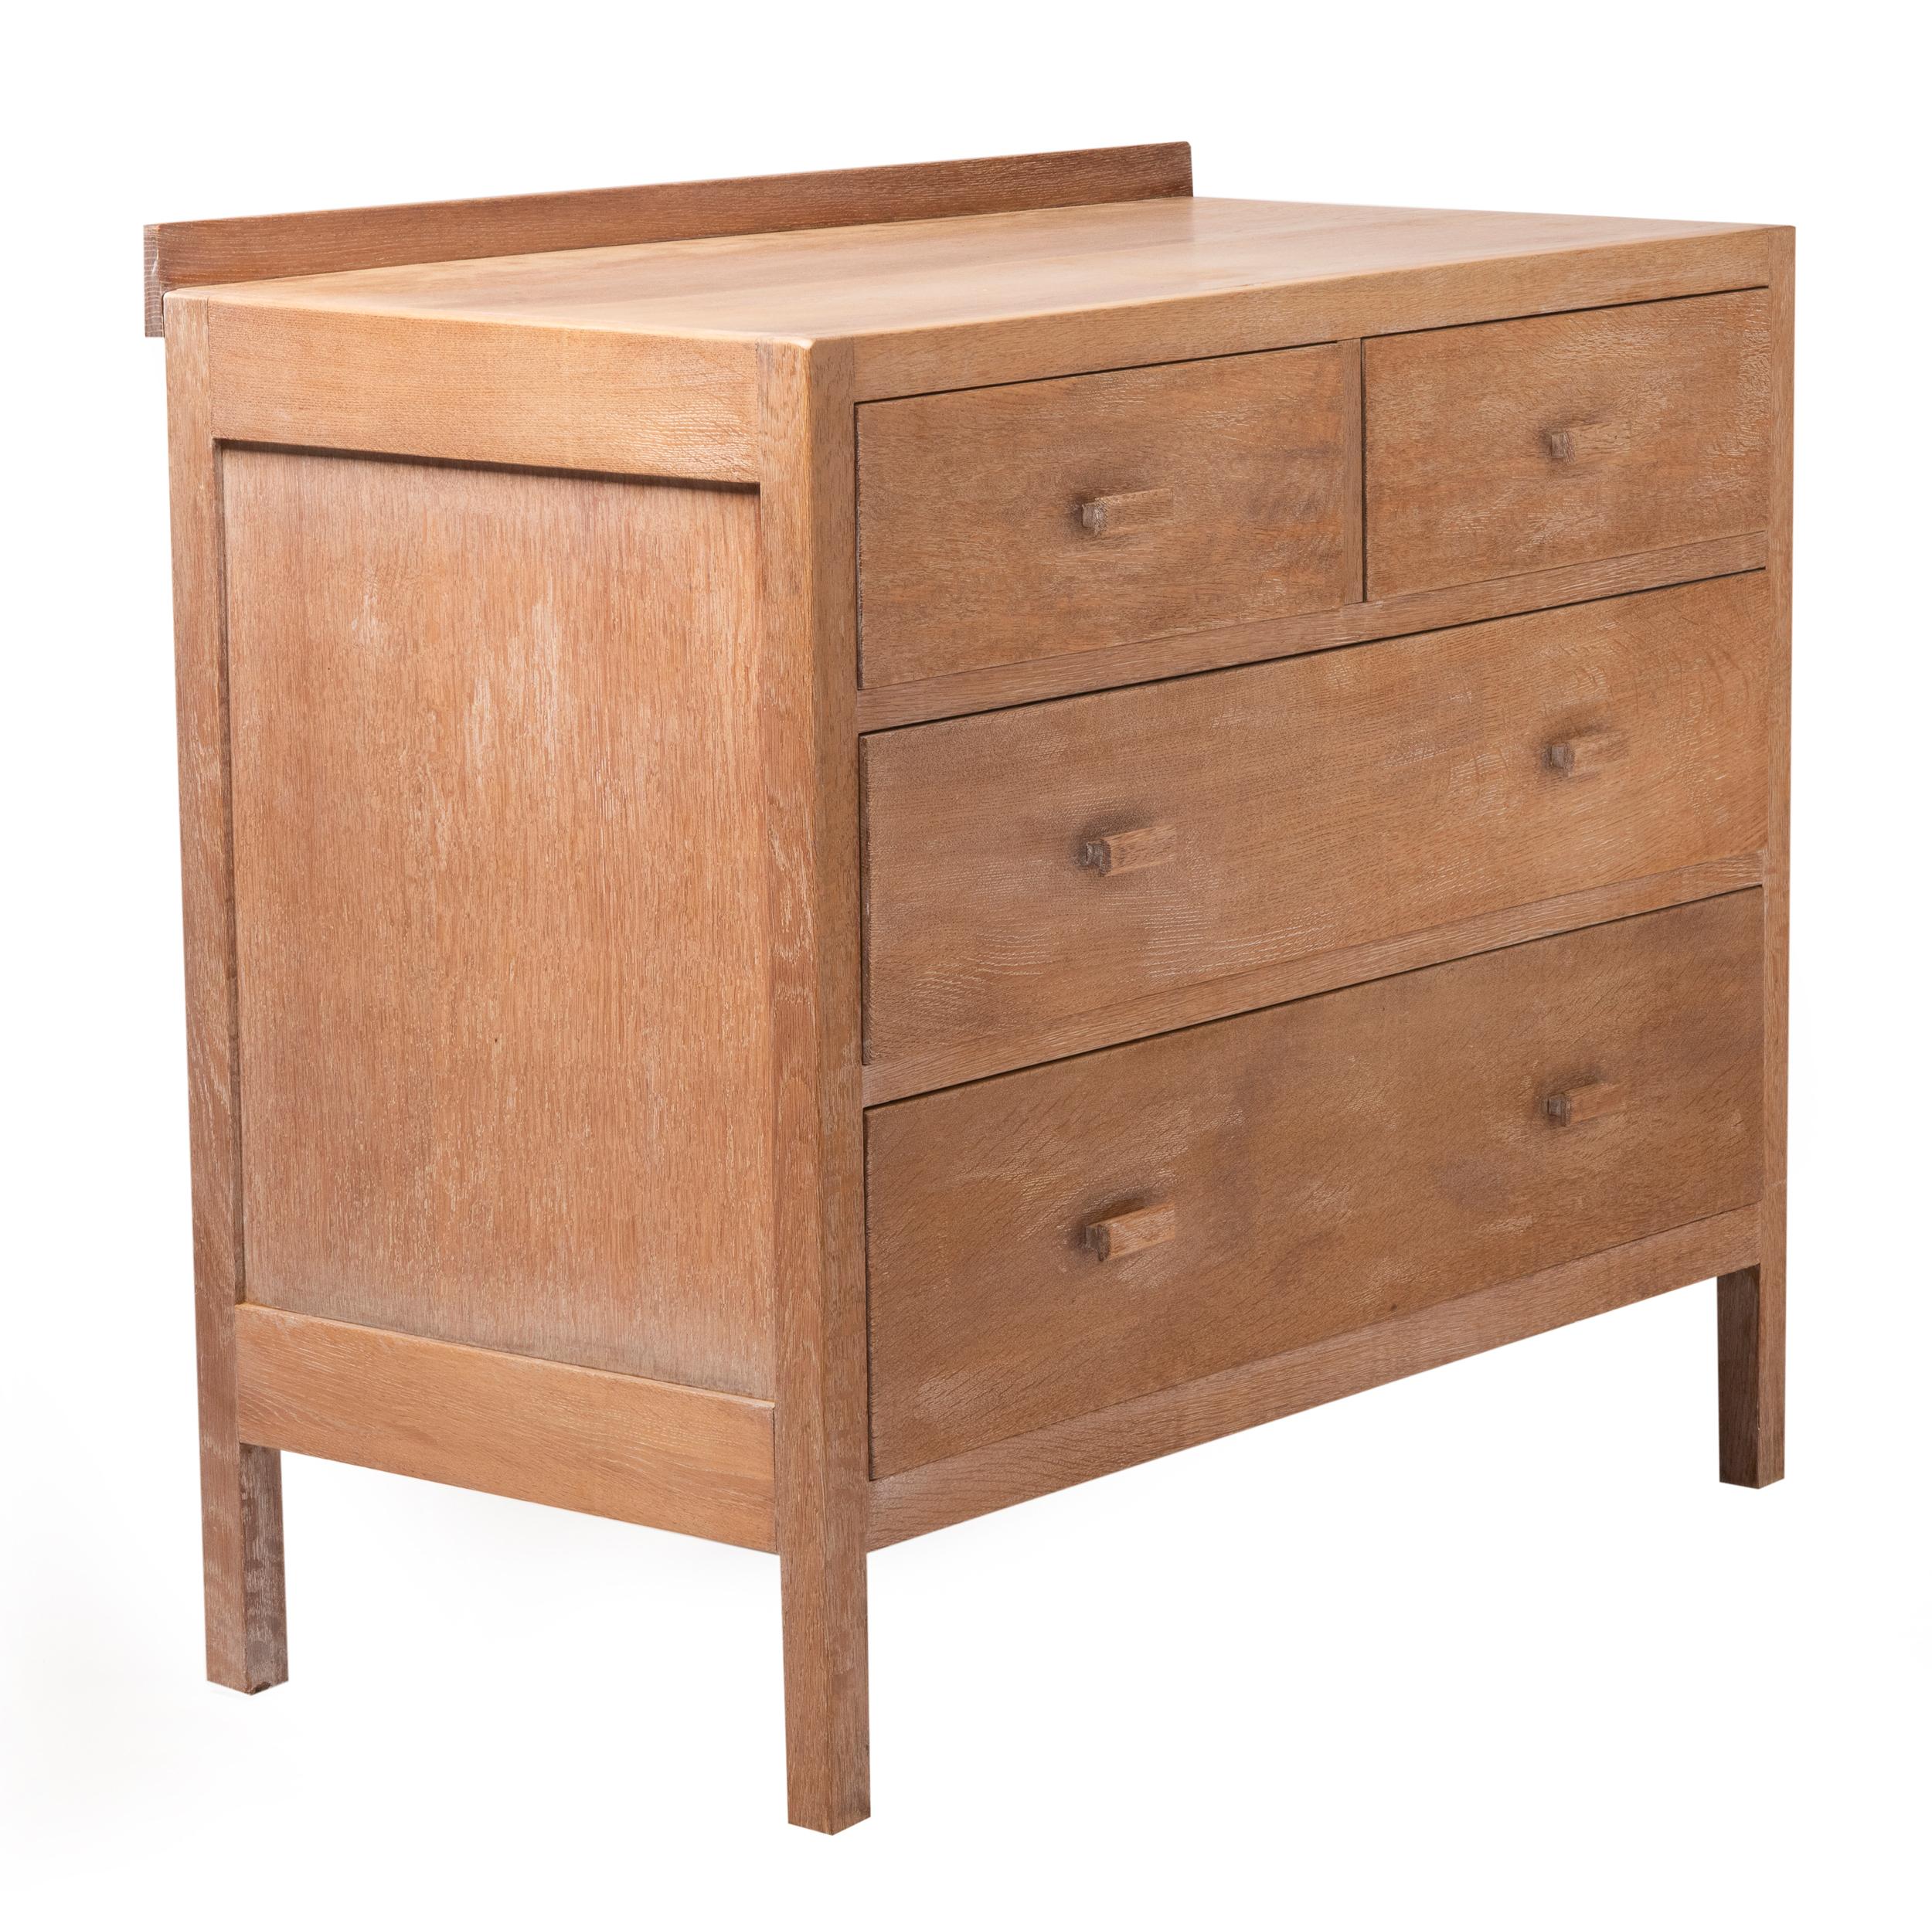 British Limed Oak Chest of Drawers by Heals, England, circa 1930 For Sale